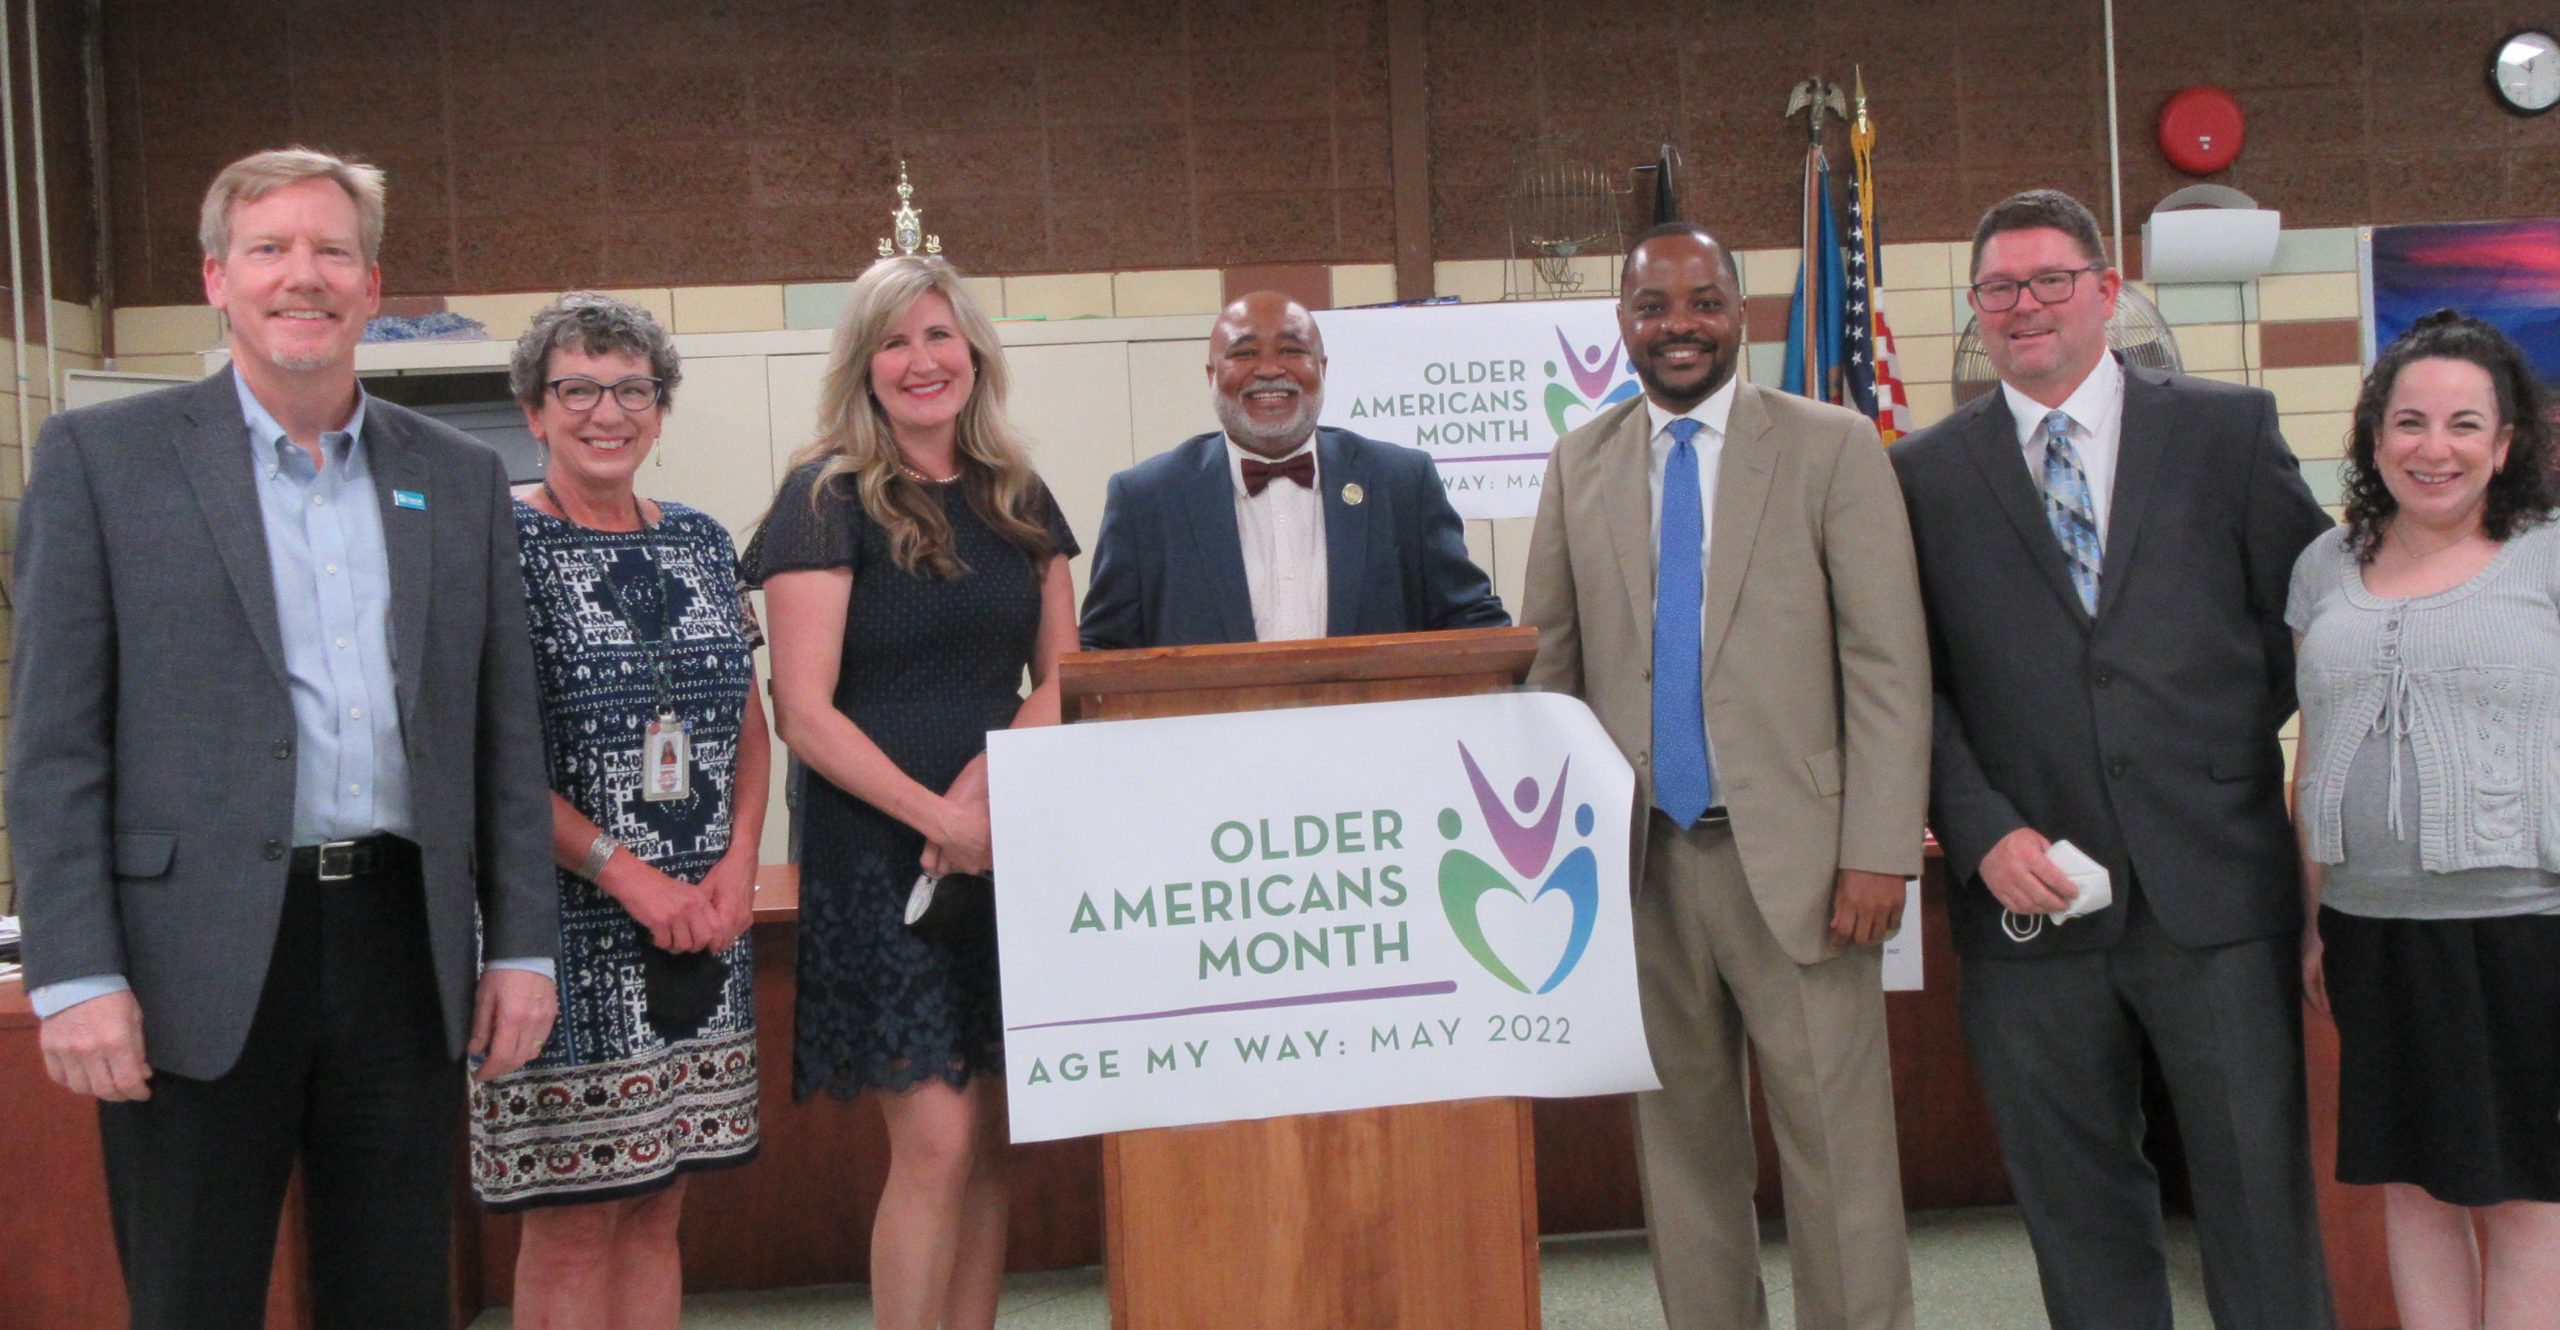 DHSS to Partner with Habitat for Humanity on Pilot Program for Minor Home Repairs for Older Delawareans